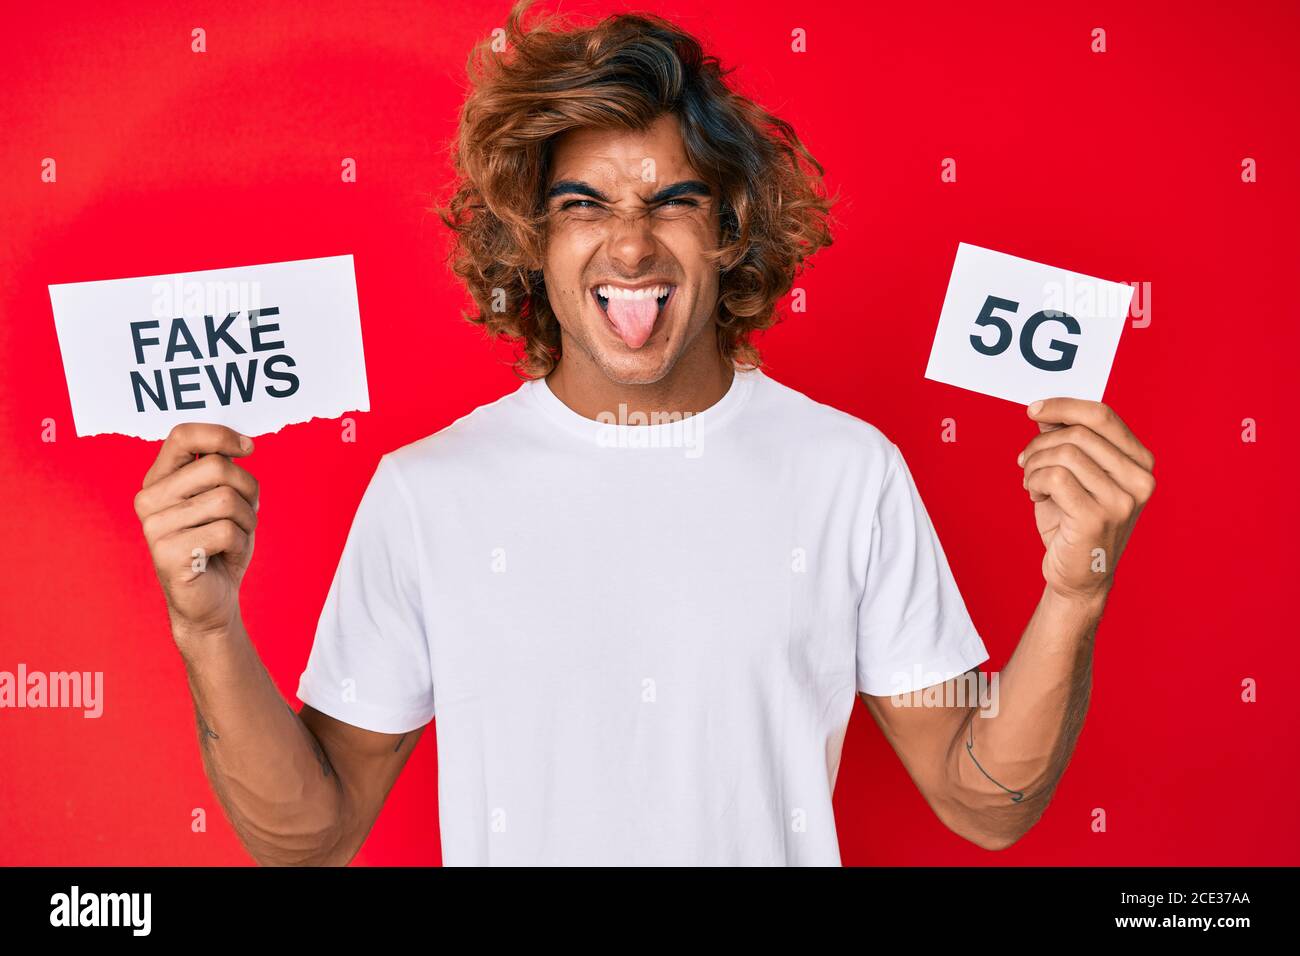 Young hispanic man holding fake news and 5g banner sticking tongue out  happy with funny expression Stock Photo - Alamy